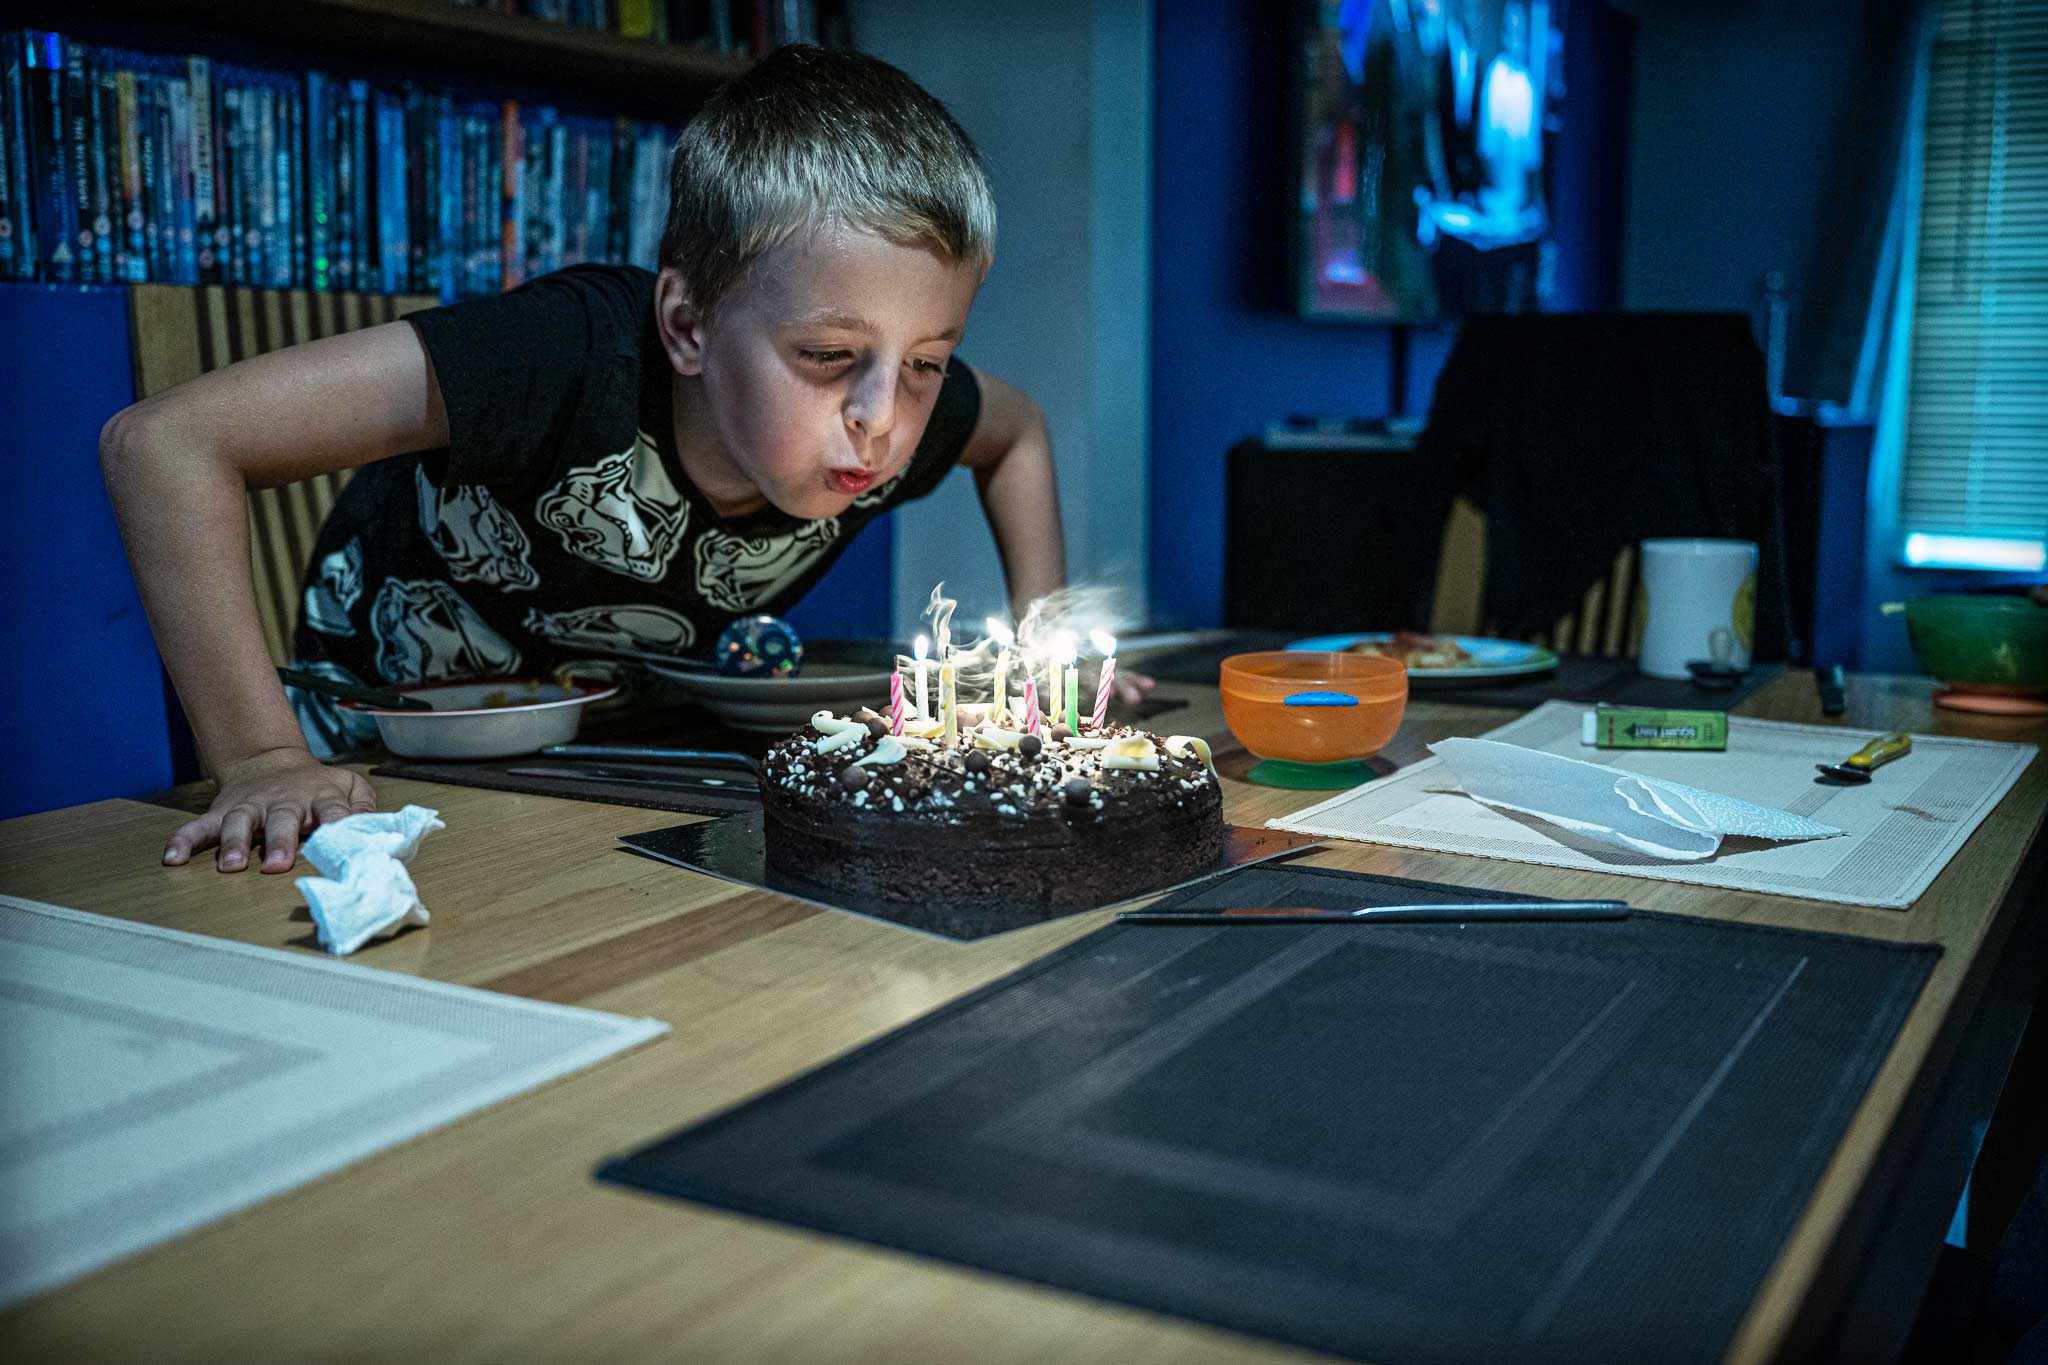 Young Boy Caden blows out candles on cake in Plymouth Childrens Birthday Photography Session